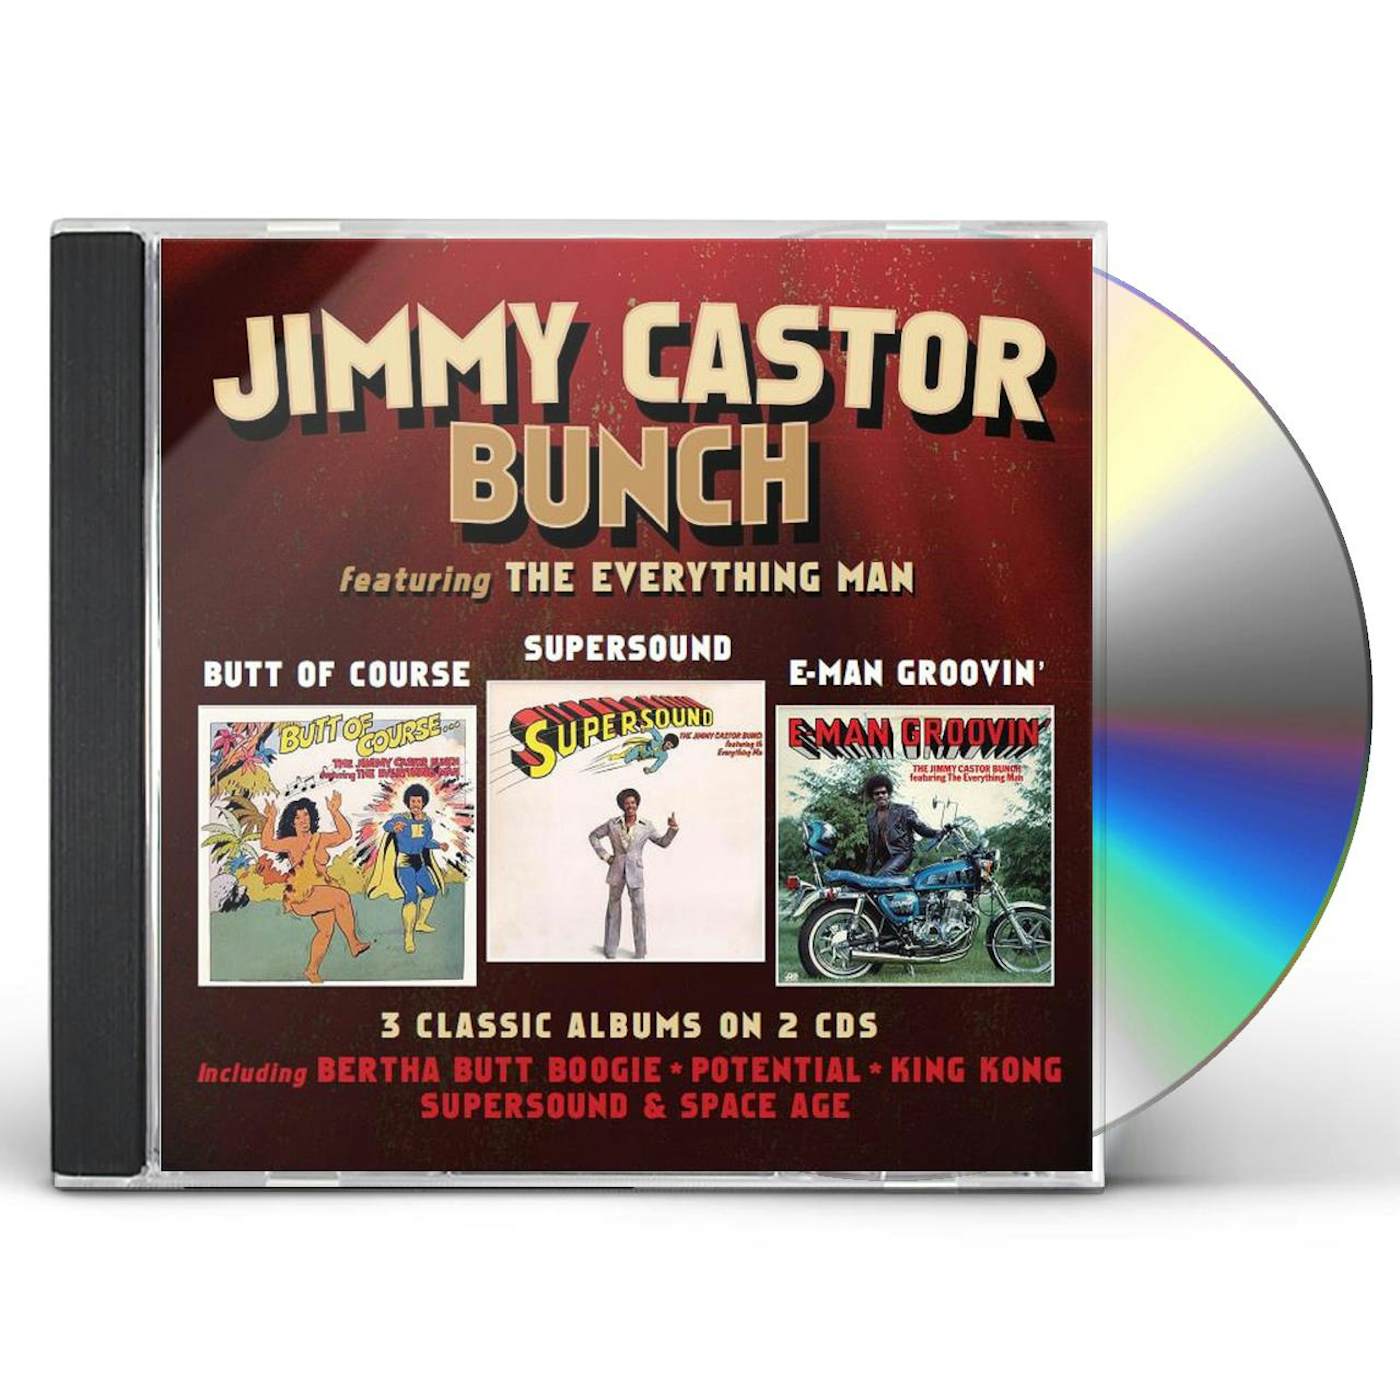 The Jimmy Castor Bunch Butt Of Course/Supersound/E Man Groovin' CD